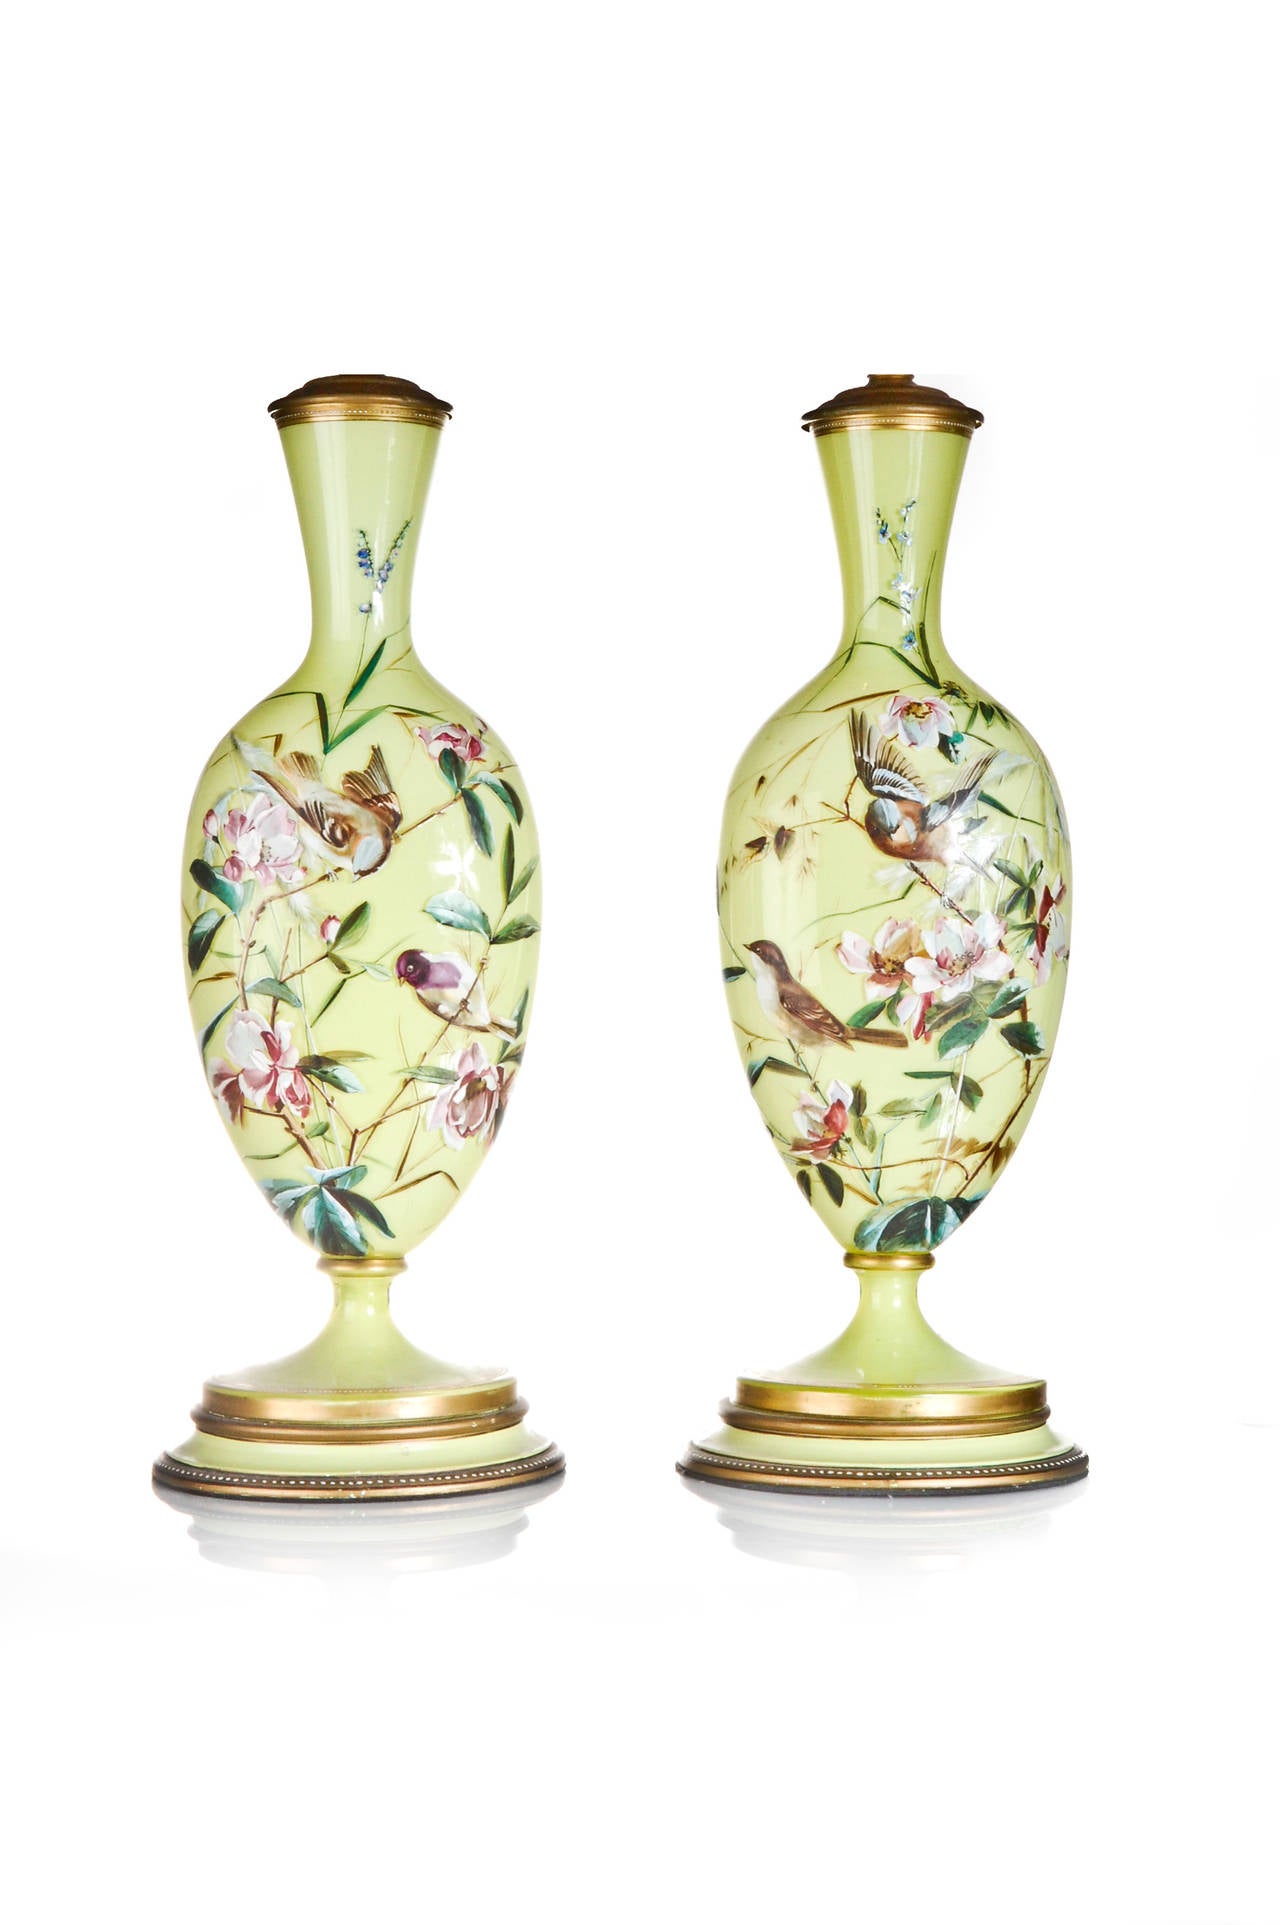 Pair of beautiful Antique French Louis XVI Style hand polychromed enameled yellow opaline glass vase/lamps embellished with hand painted enamel flowers & birds.